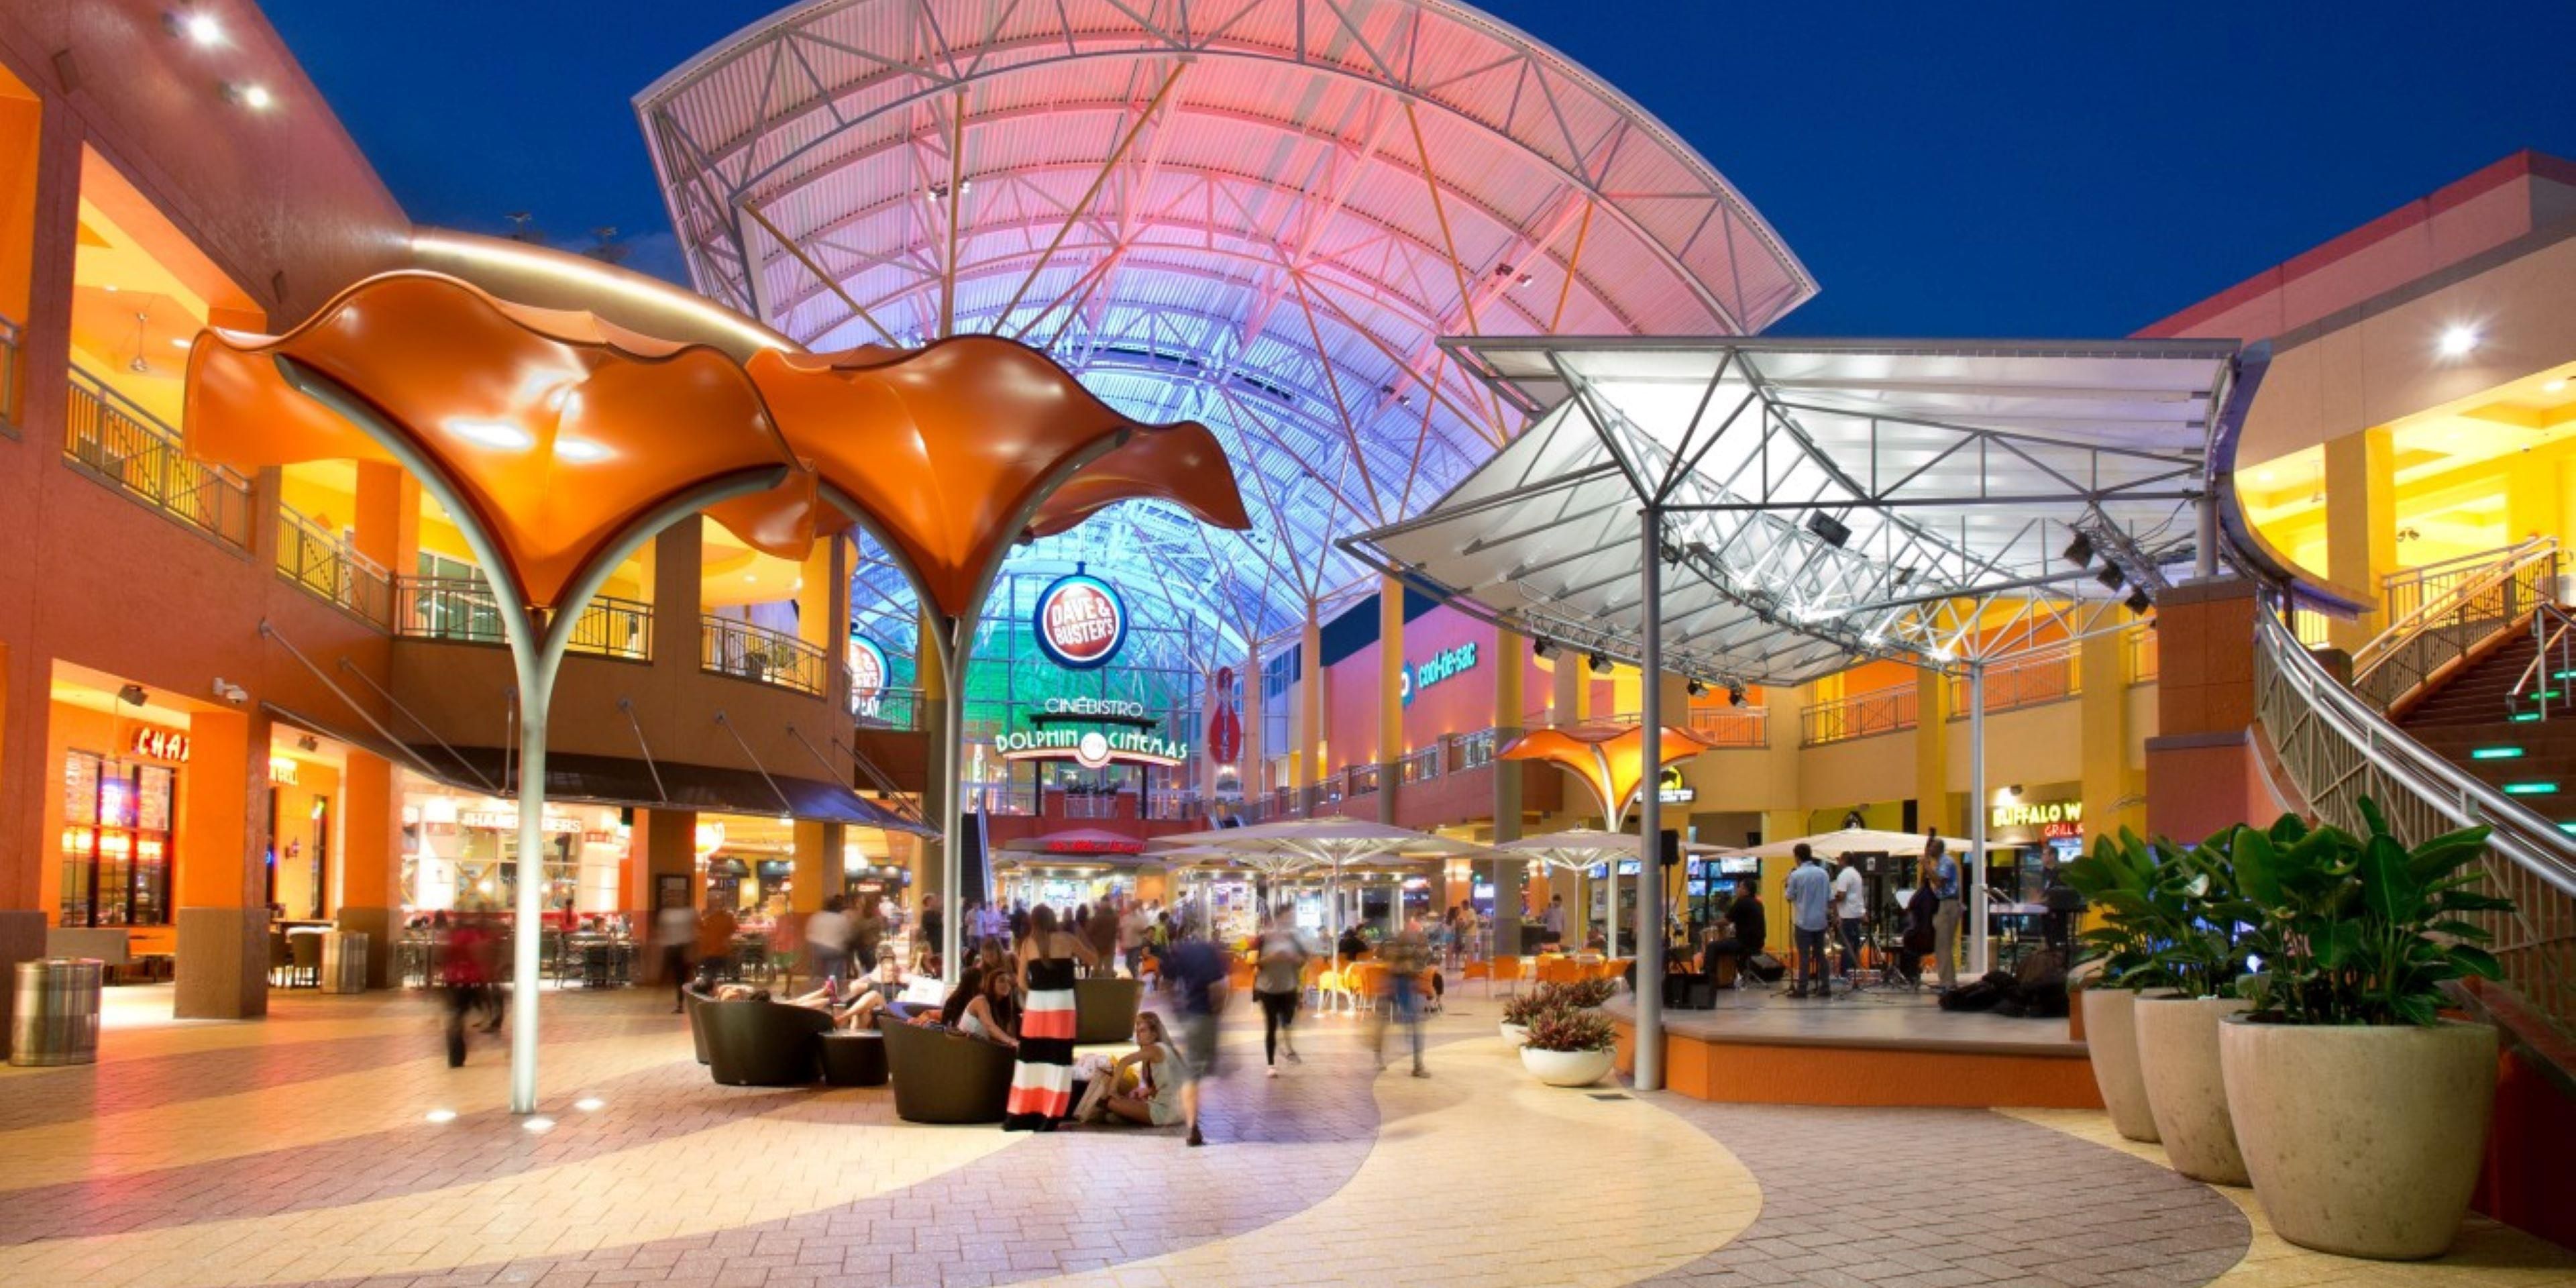 If you're looking for entertainment, vast shopping options, and delicious dining options Dolphin Mall is the perfect place for you and the whole family! Located only 0.8 miles from the hotel, Dolphin Mall is South Florida's top outlet mall.